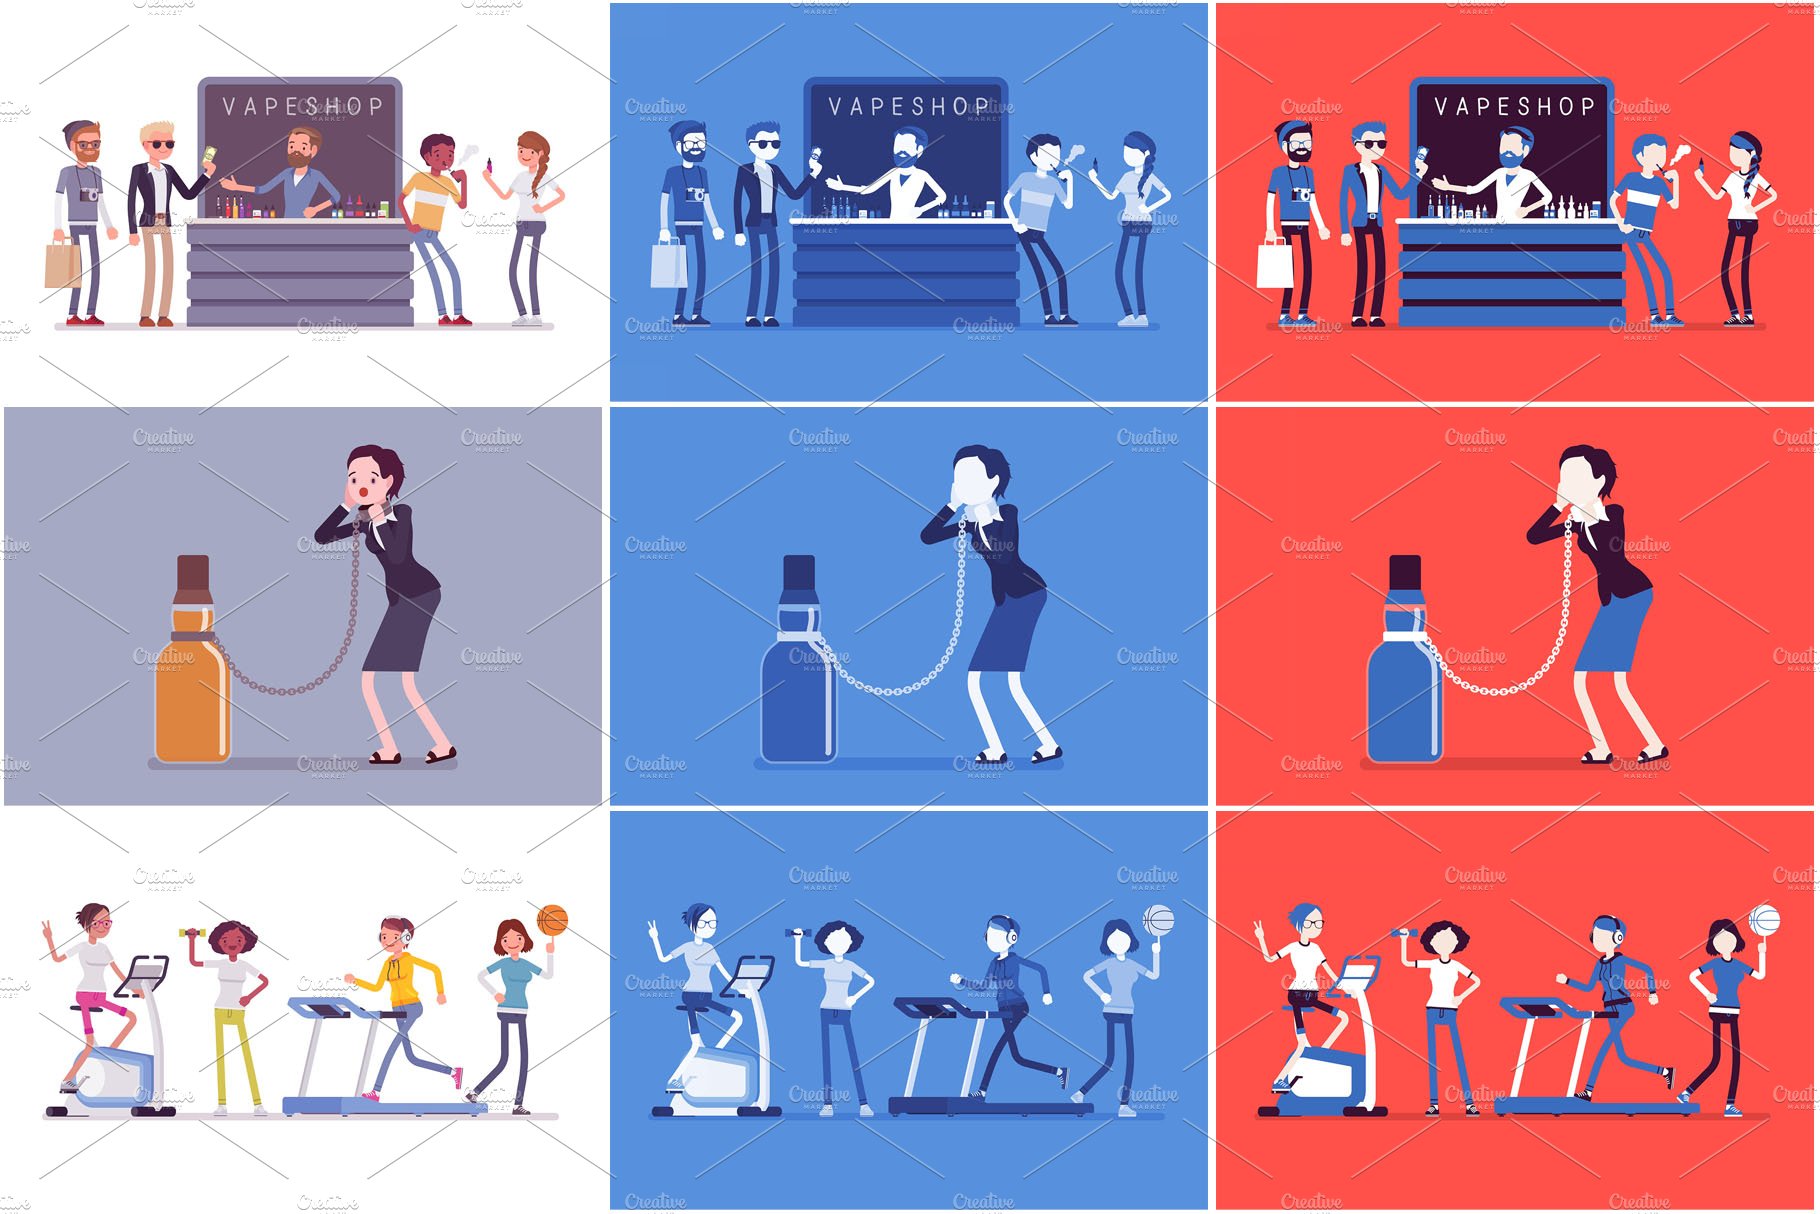 A series of illustrations of people in different poses.